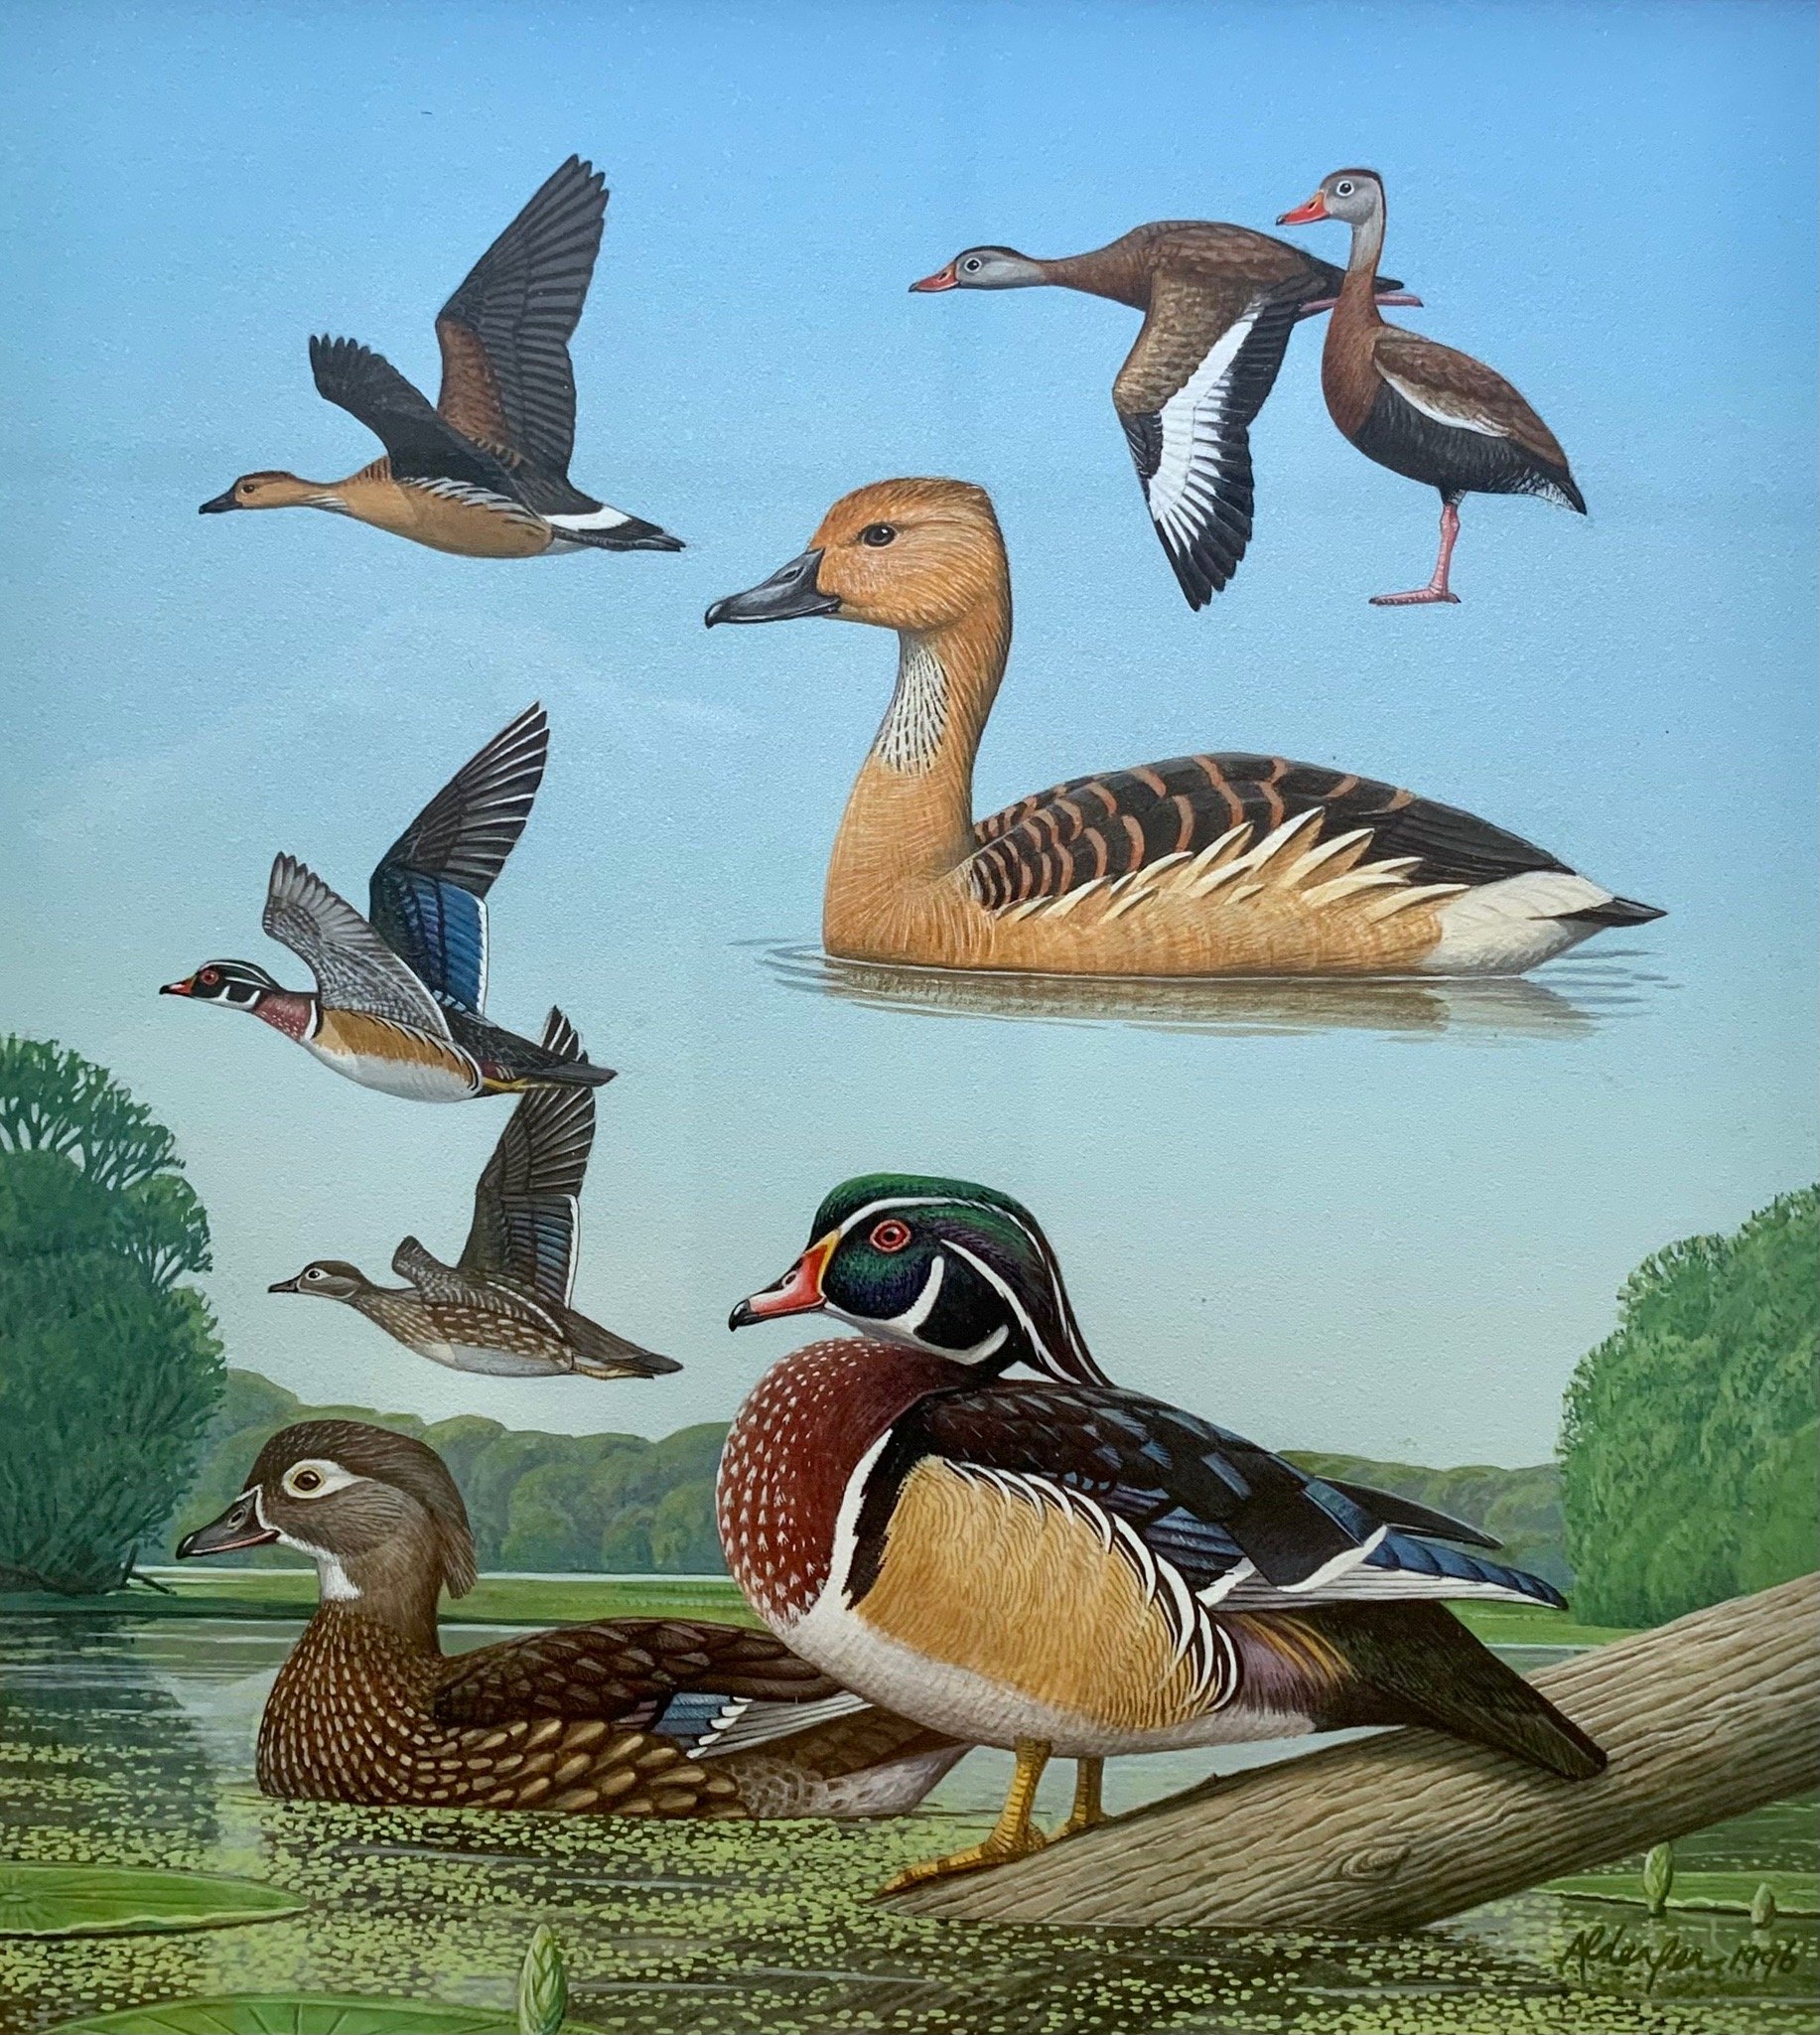 Wood Ducks, Fulvous Whistling-Ducks, and Black-bellied Whistling-Ducks, 1996  (Copy)